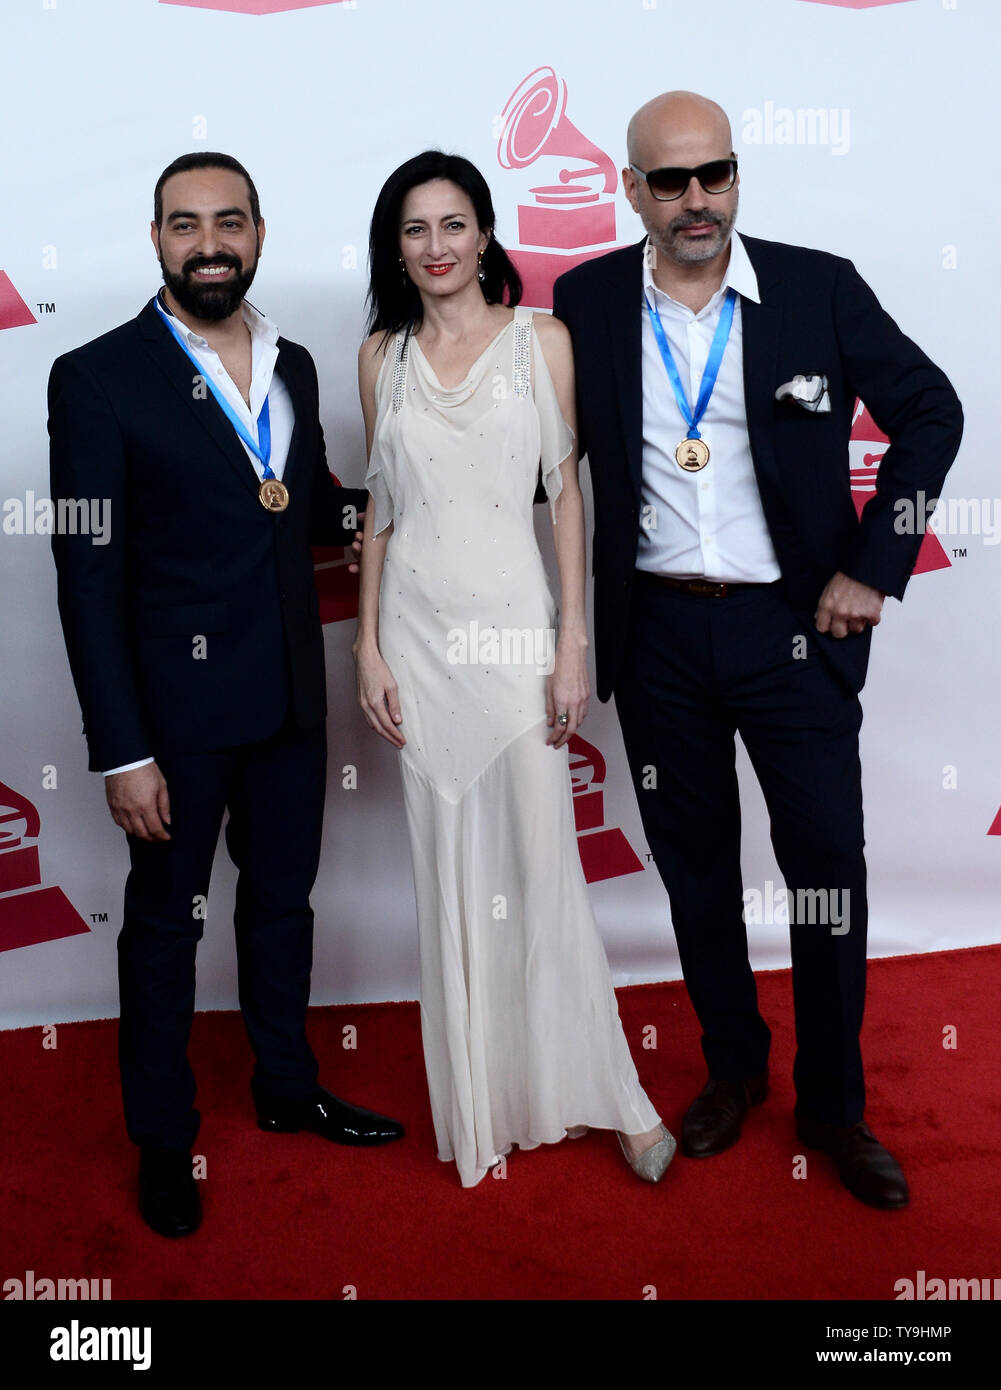 From left, Cucu Diamantes, Alain Perez and Andres Levin arrive for the Latin Recording Academy Person of the Year tribute to Brazilian singer/songwriter Roberto Carlos at the Mandalay Bay Convention Center in Las Vegas, Nevada on November 18, 2015.   Photo by Jim Ruymen/UPI Stock Photo